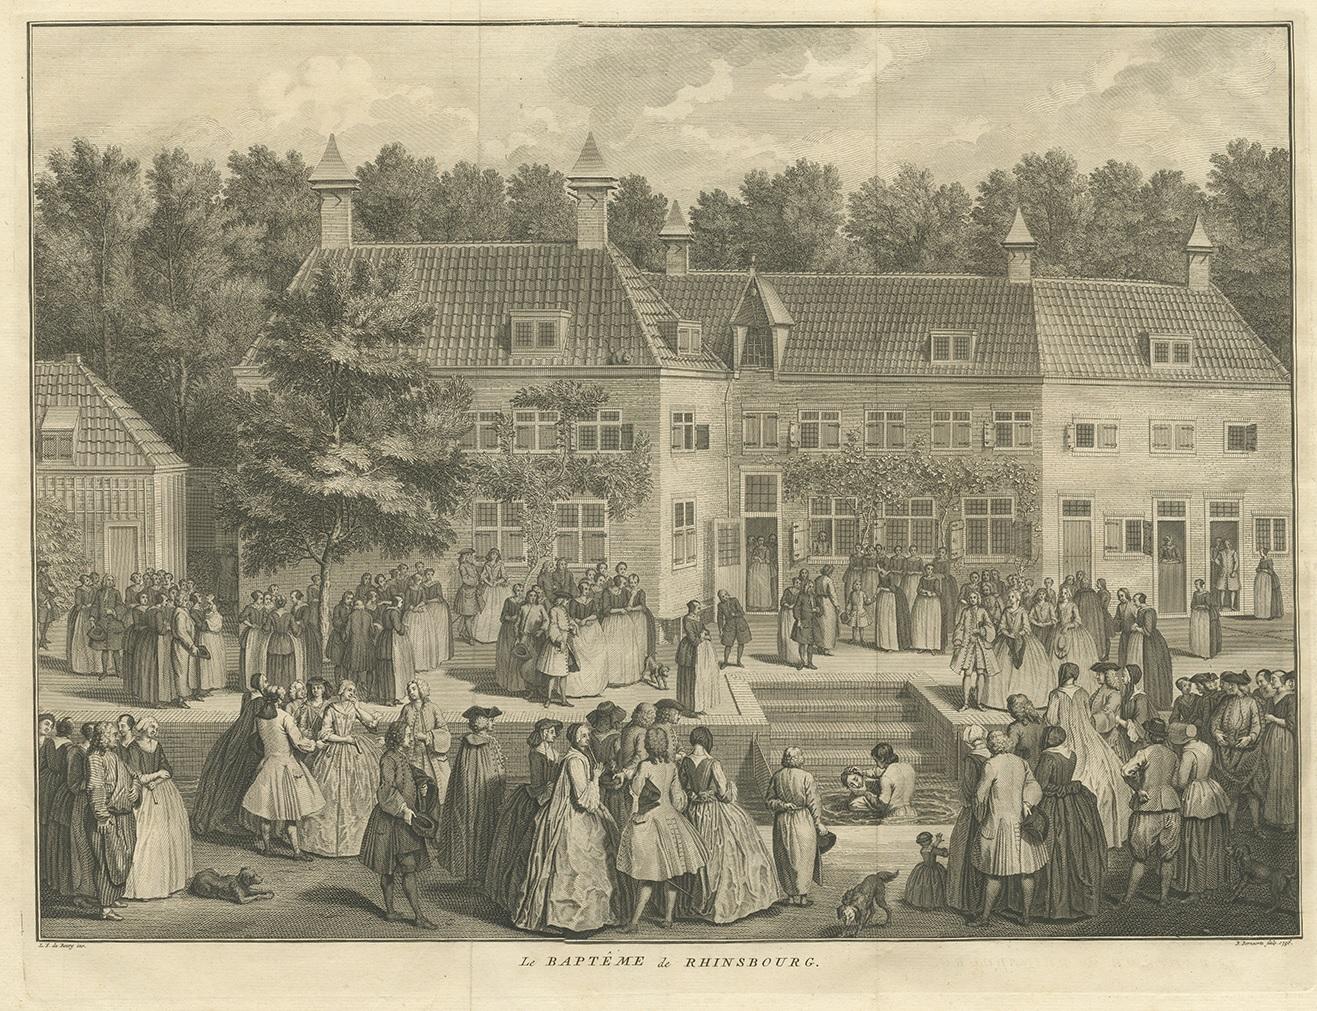 Antique print titled 'Le Baptême de Rhinsbourg'. This print depicts the baptism of Christians in Katwijk-Rijnsburg in The Netherlands. Engraved by B. Bernaerts.